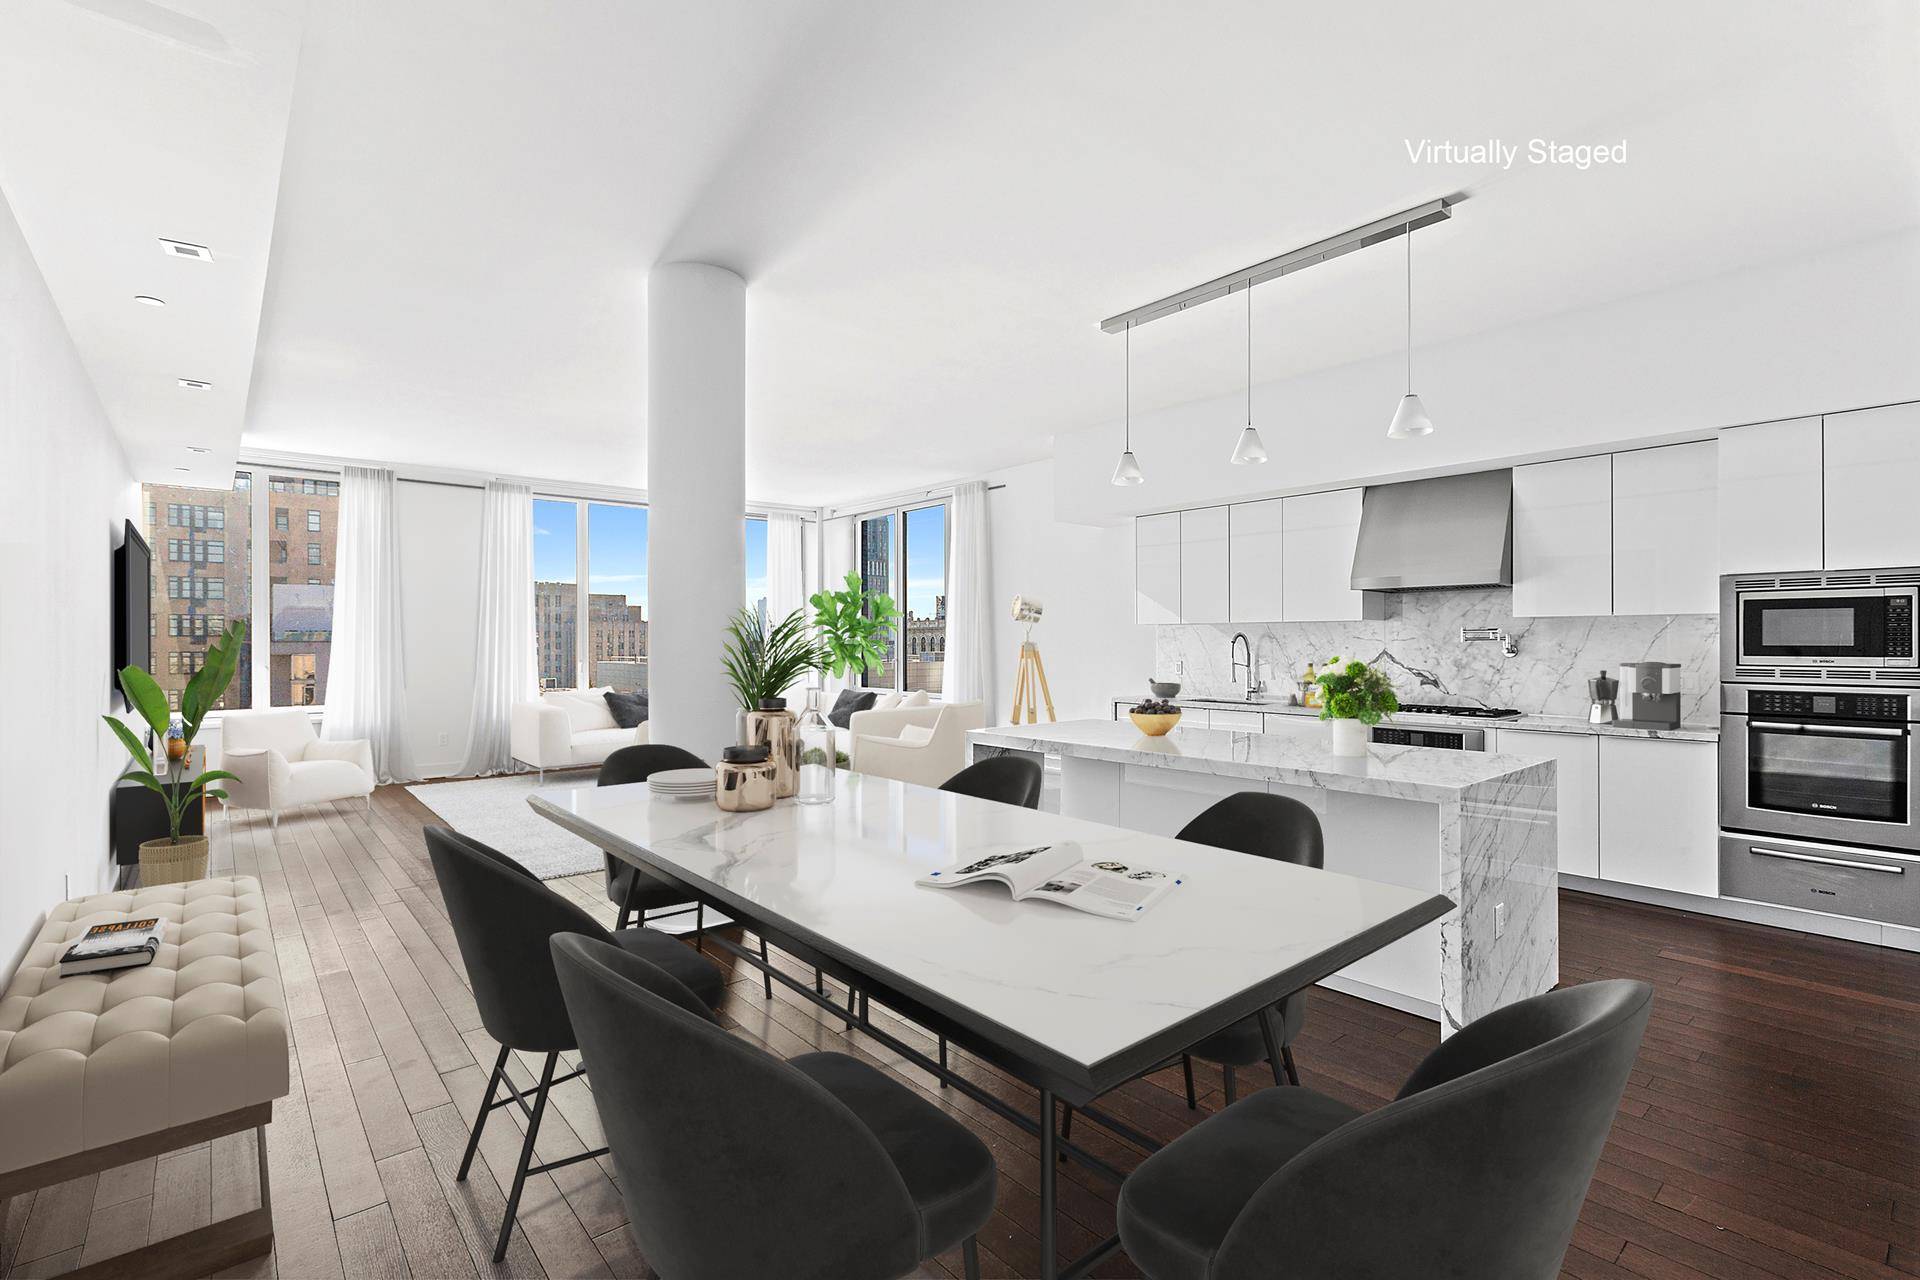 This stunning Tribeca PH has nearly 2500 sq ft of space, 3 bedrooms, 3.